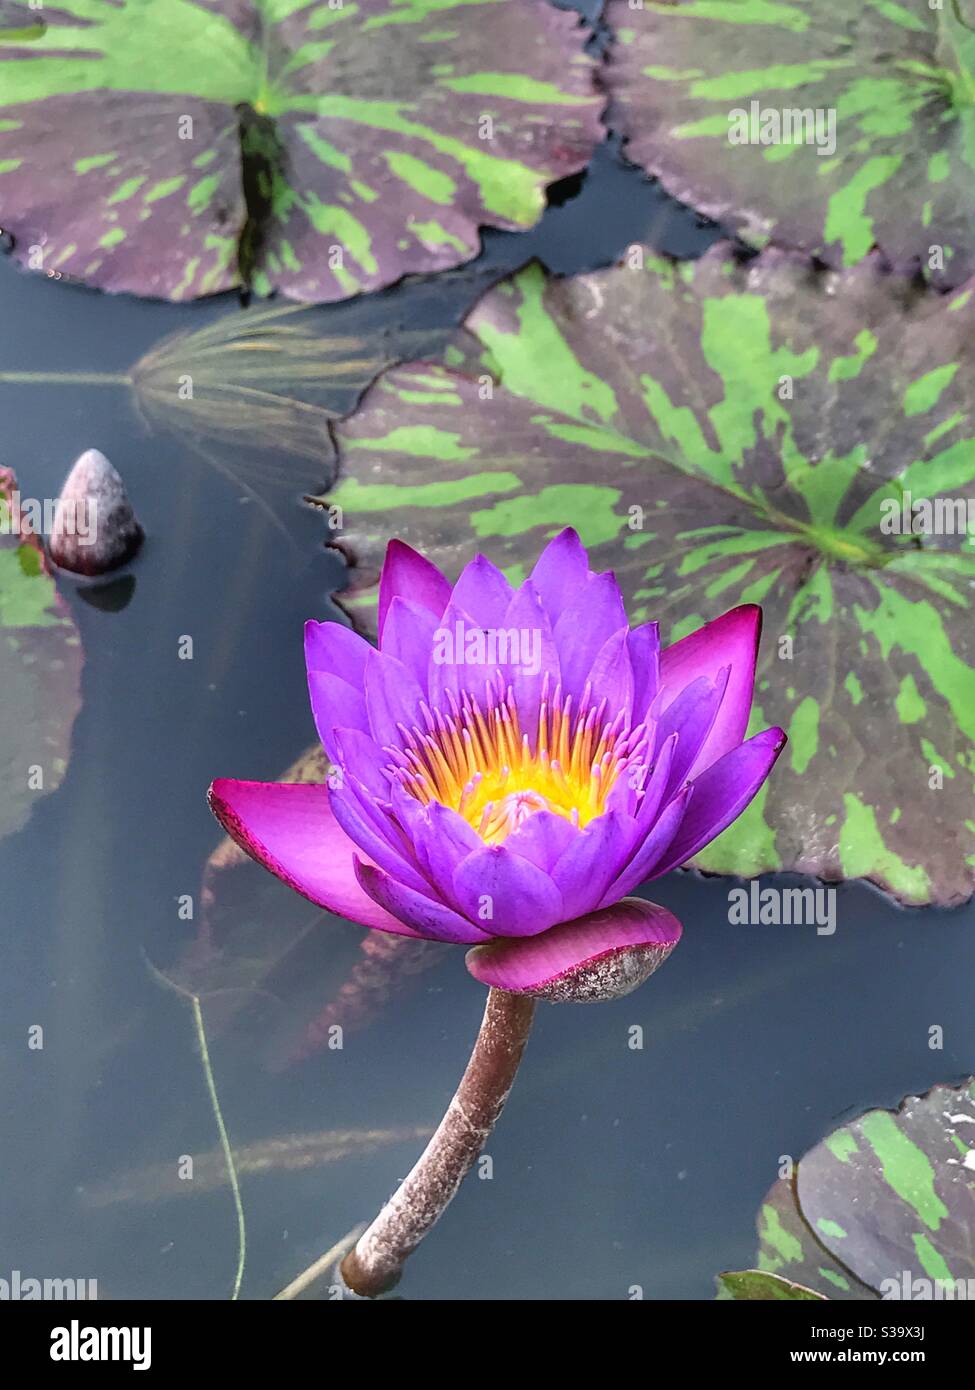 Beautiful purple lily flower in a koi pond Stock Photo